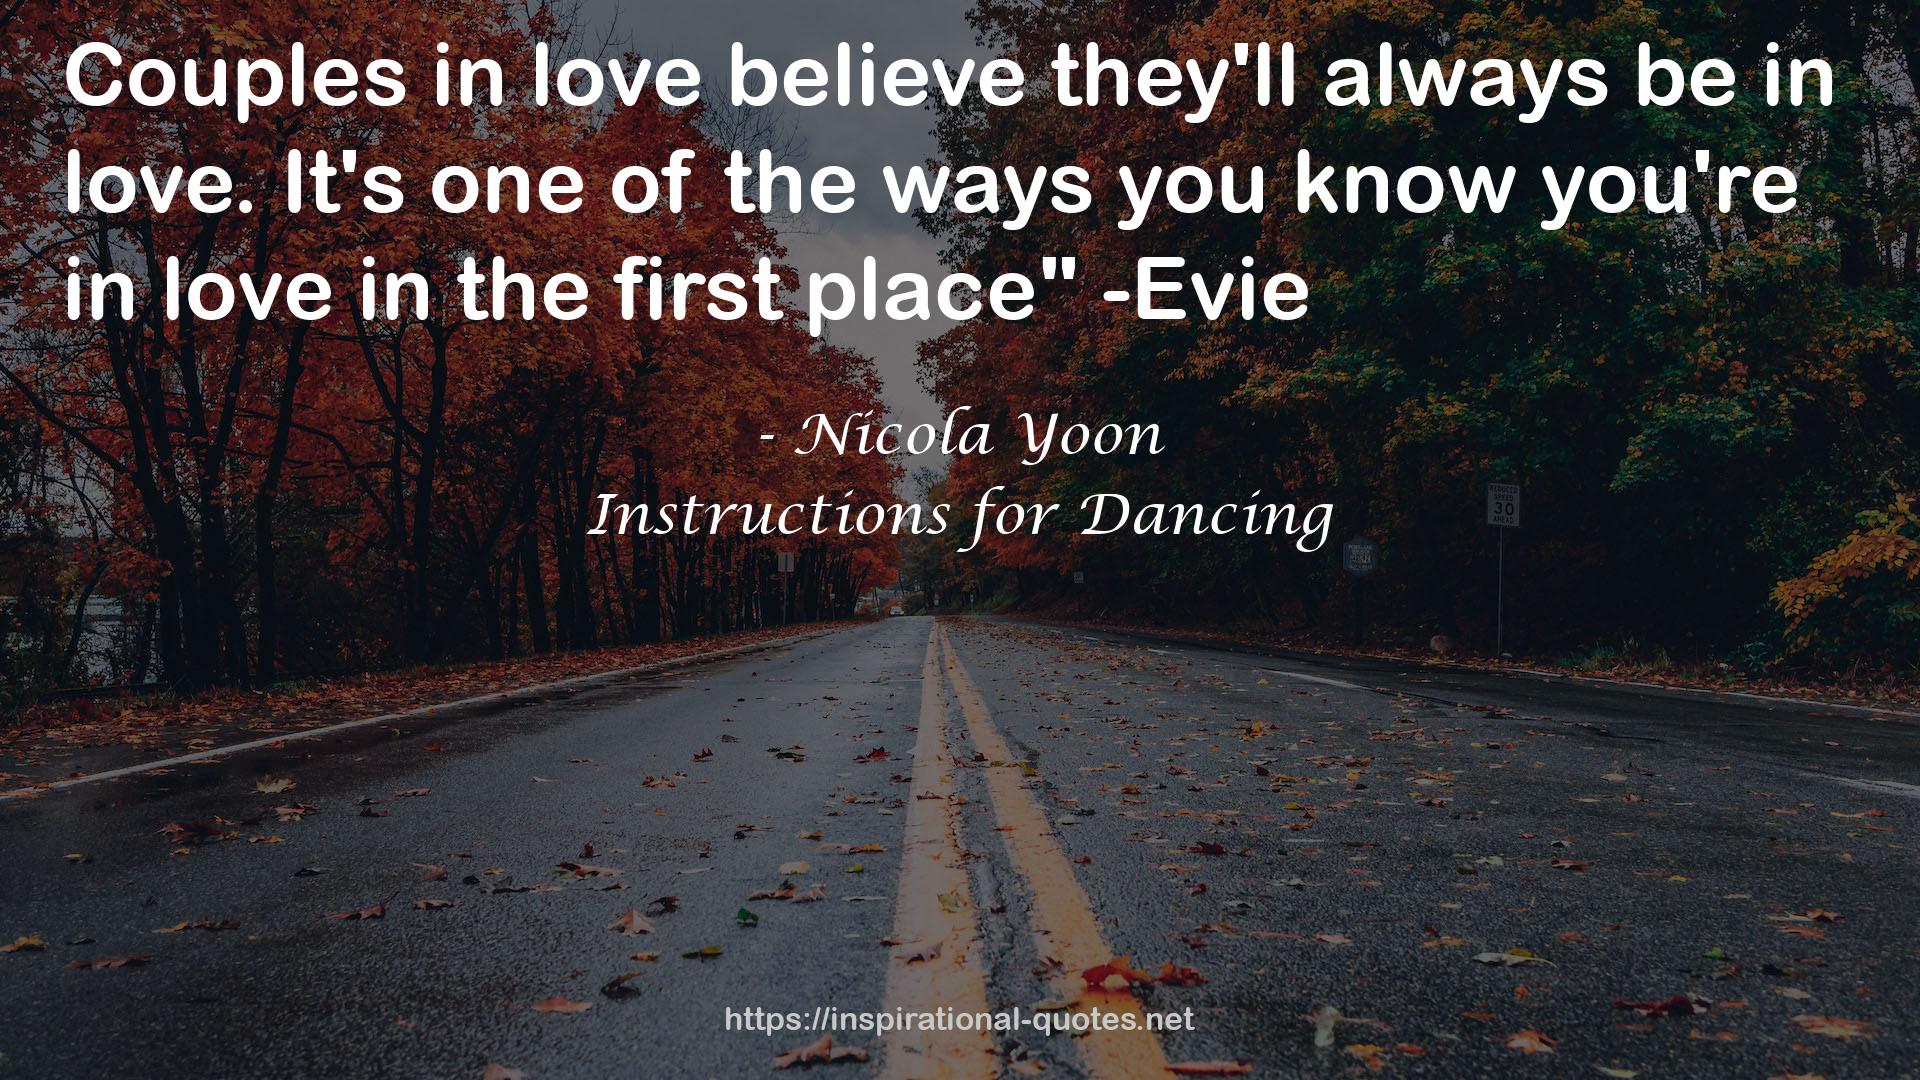 Instructions for Dancing QUOTES